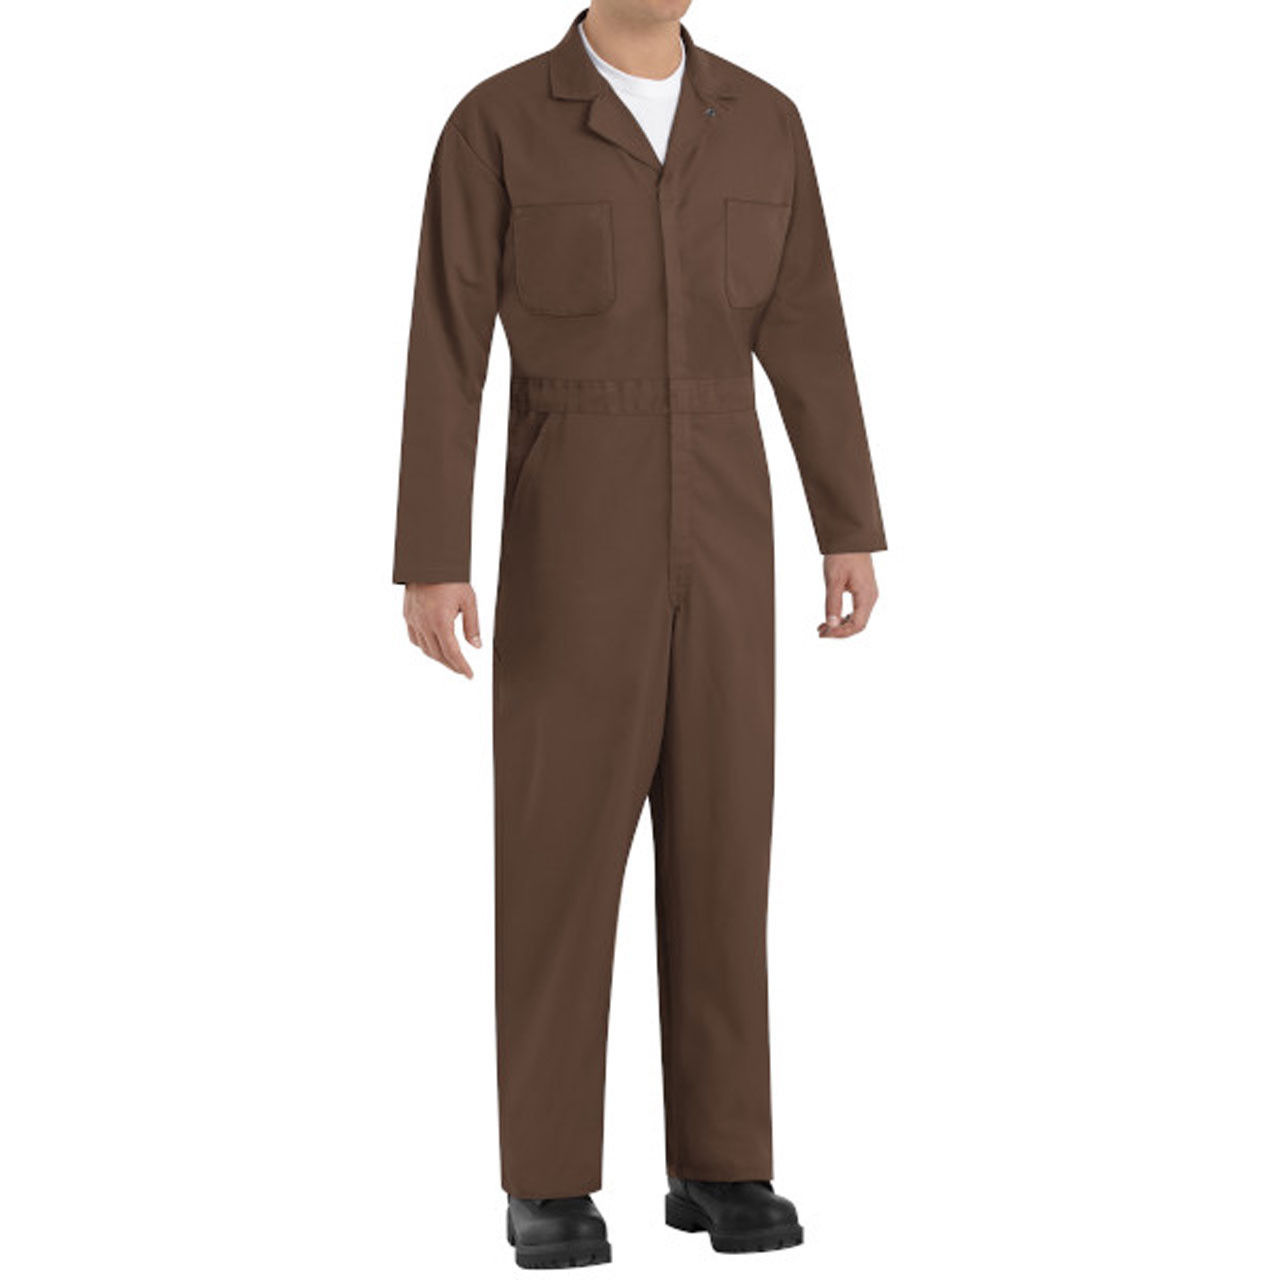 Does the brown coveralls offer comfort and easy movement?